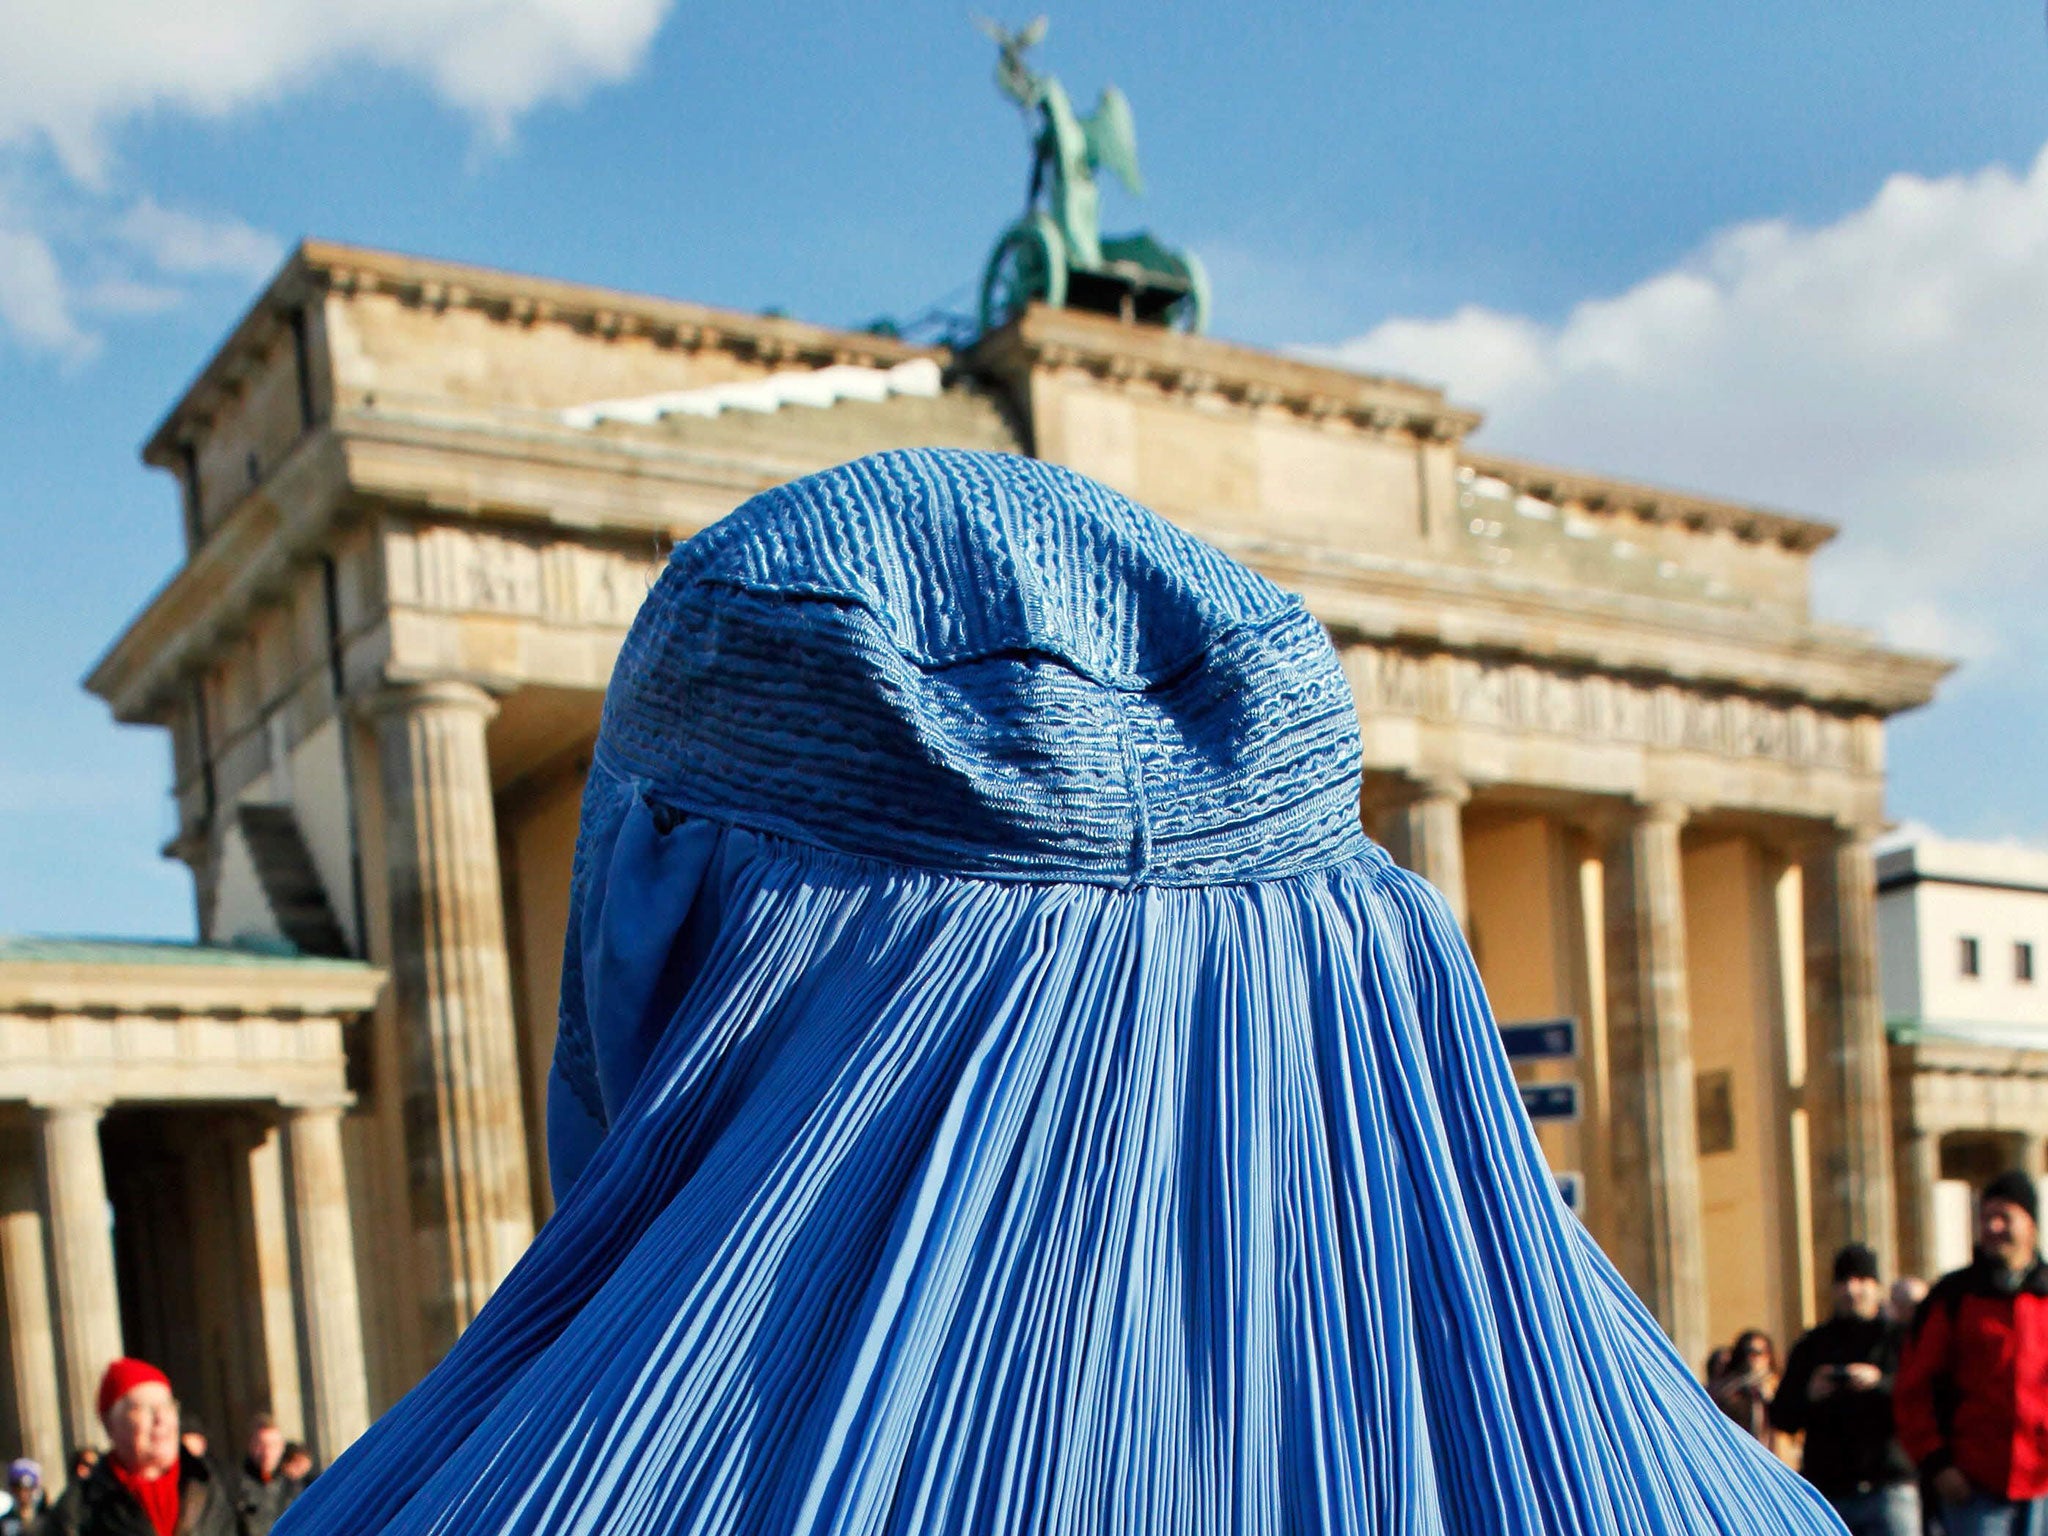 Opponents argued that the wearing of veils in public bodies is so rare that the law was redundant